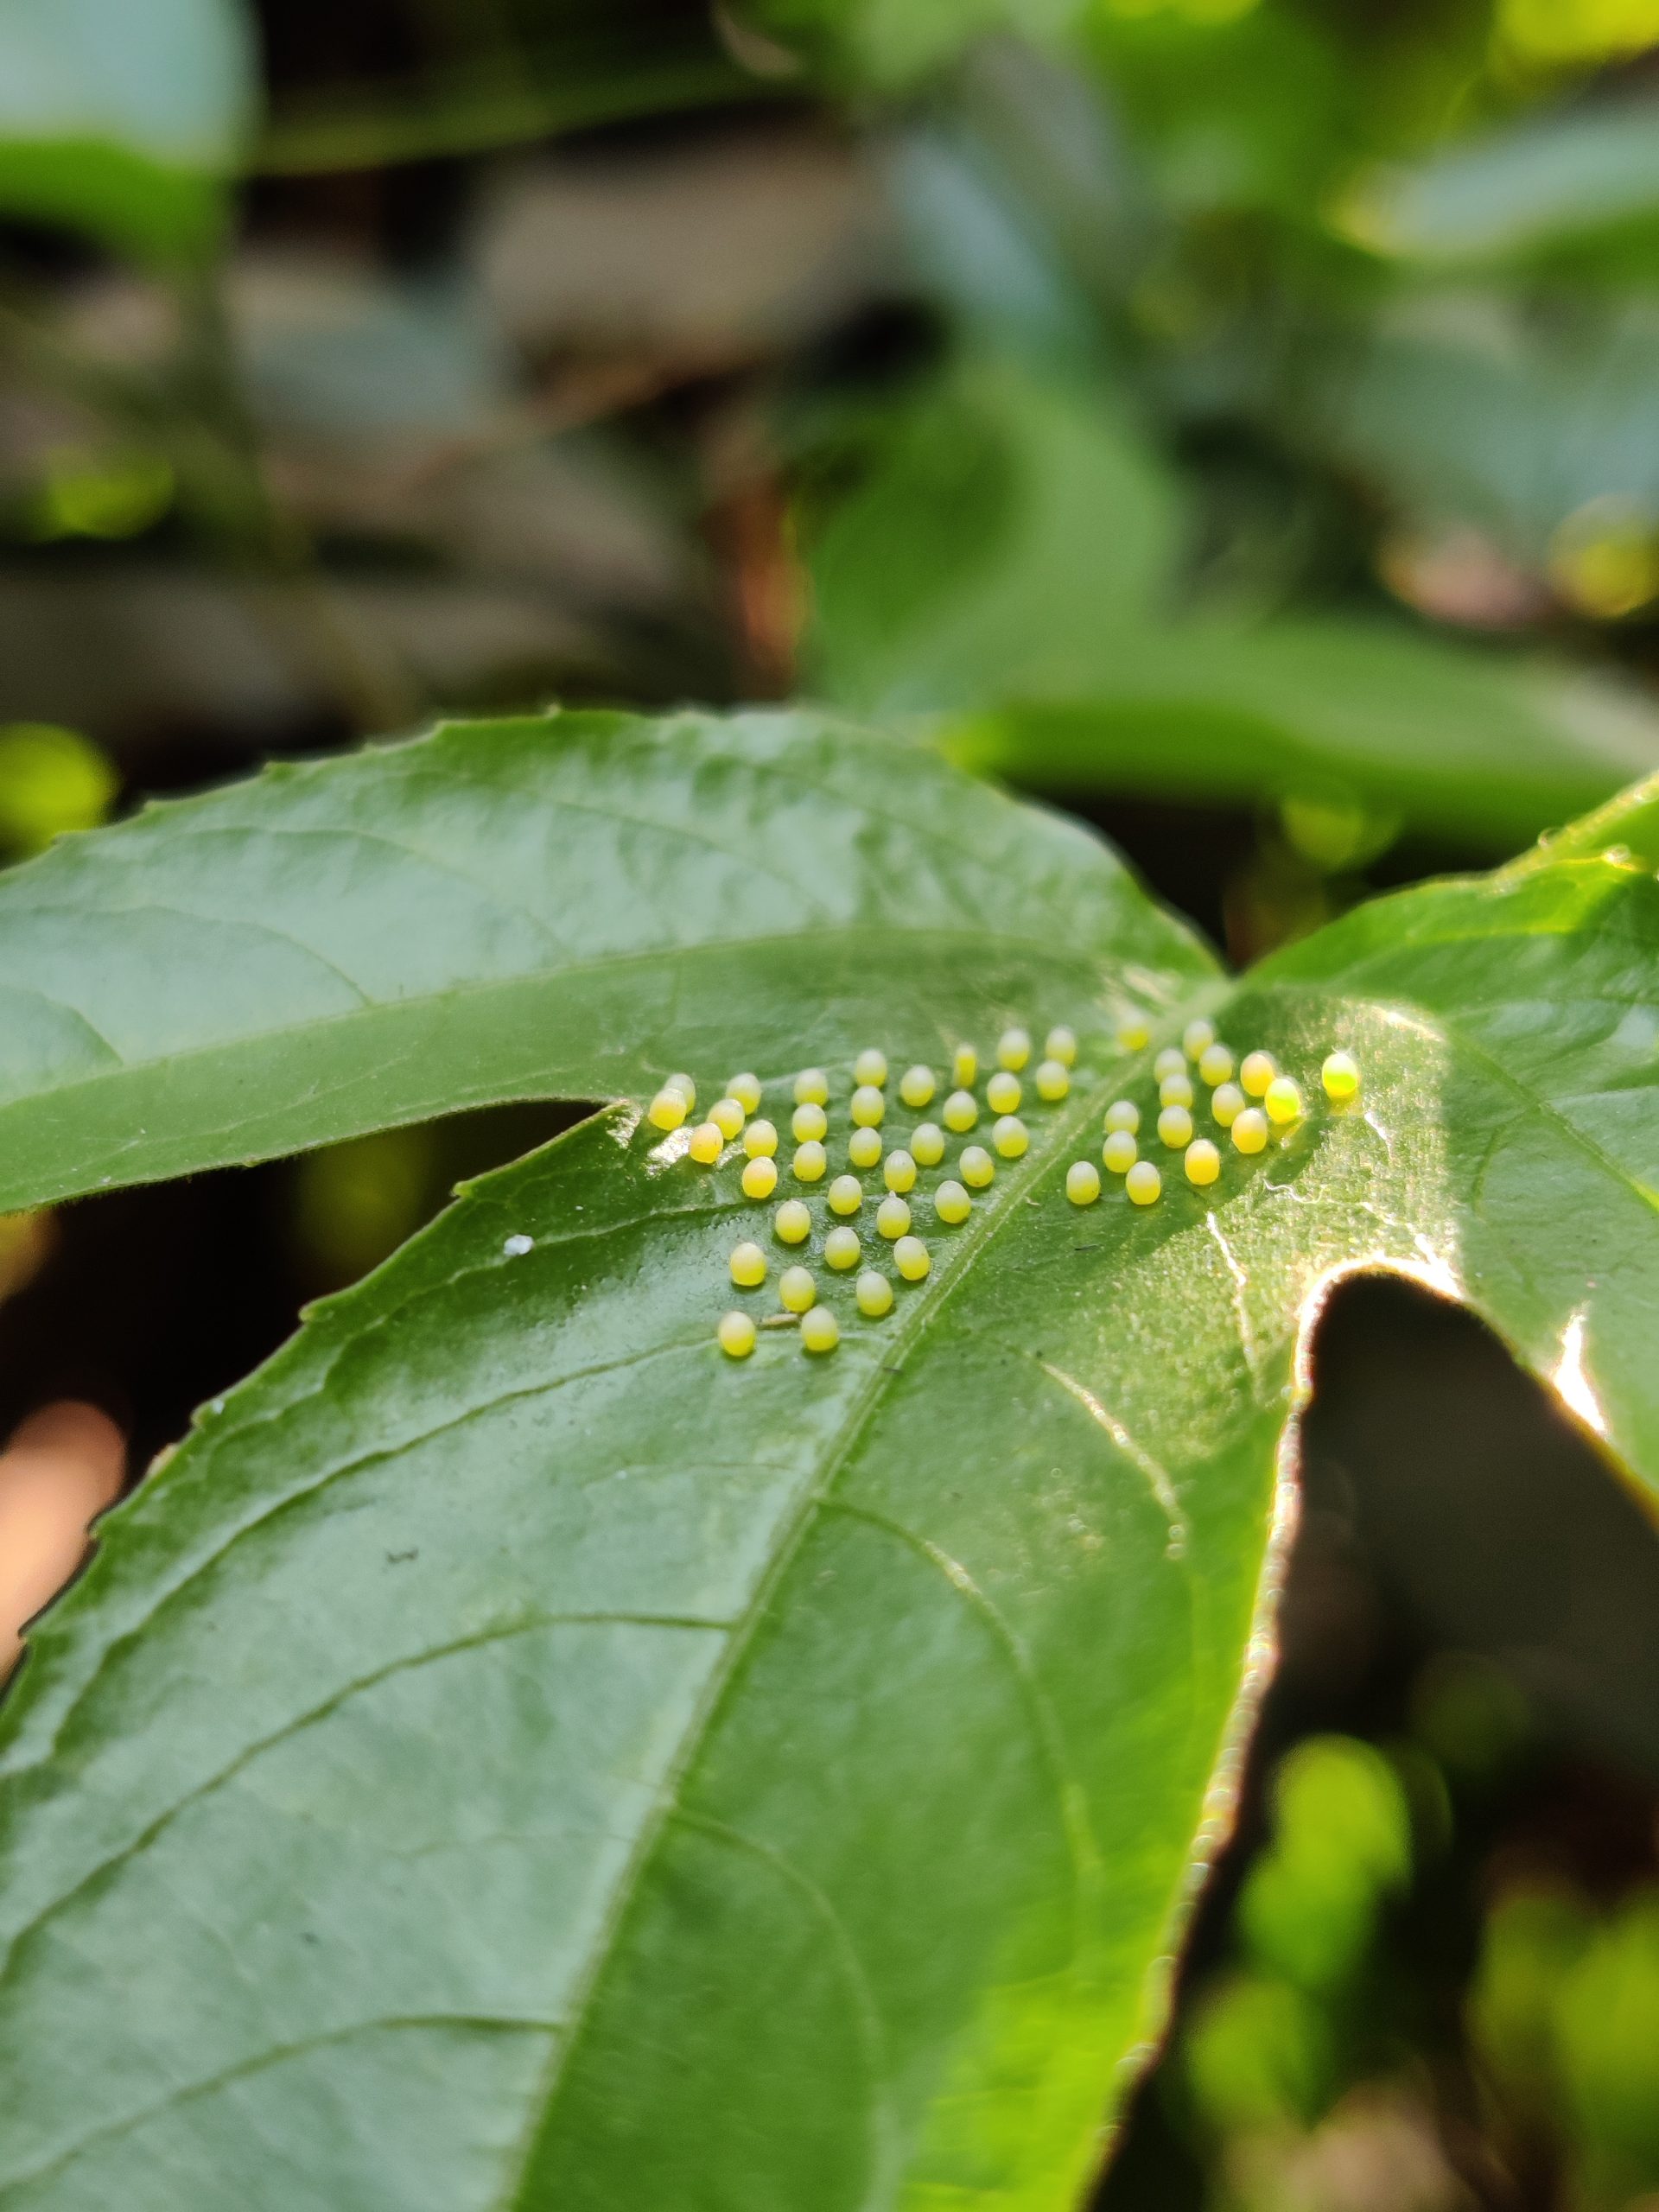 Insect eggs on plant leaf